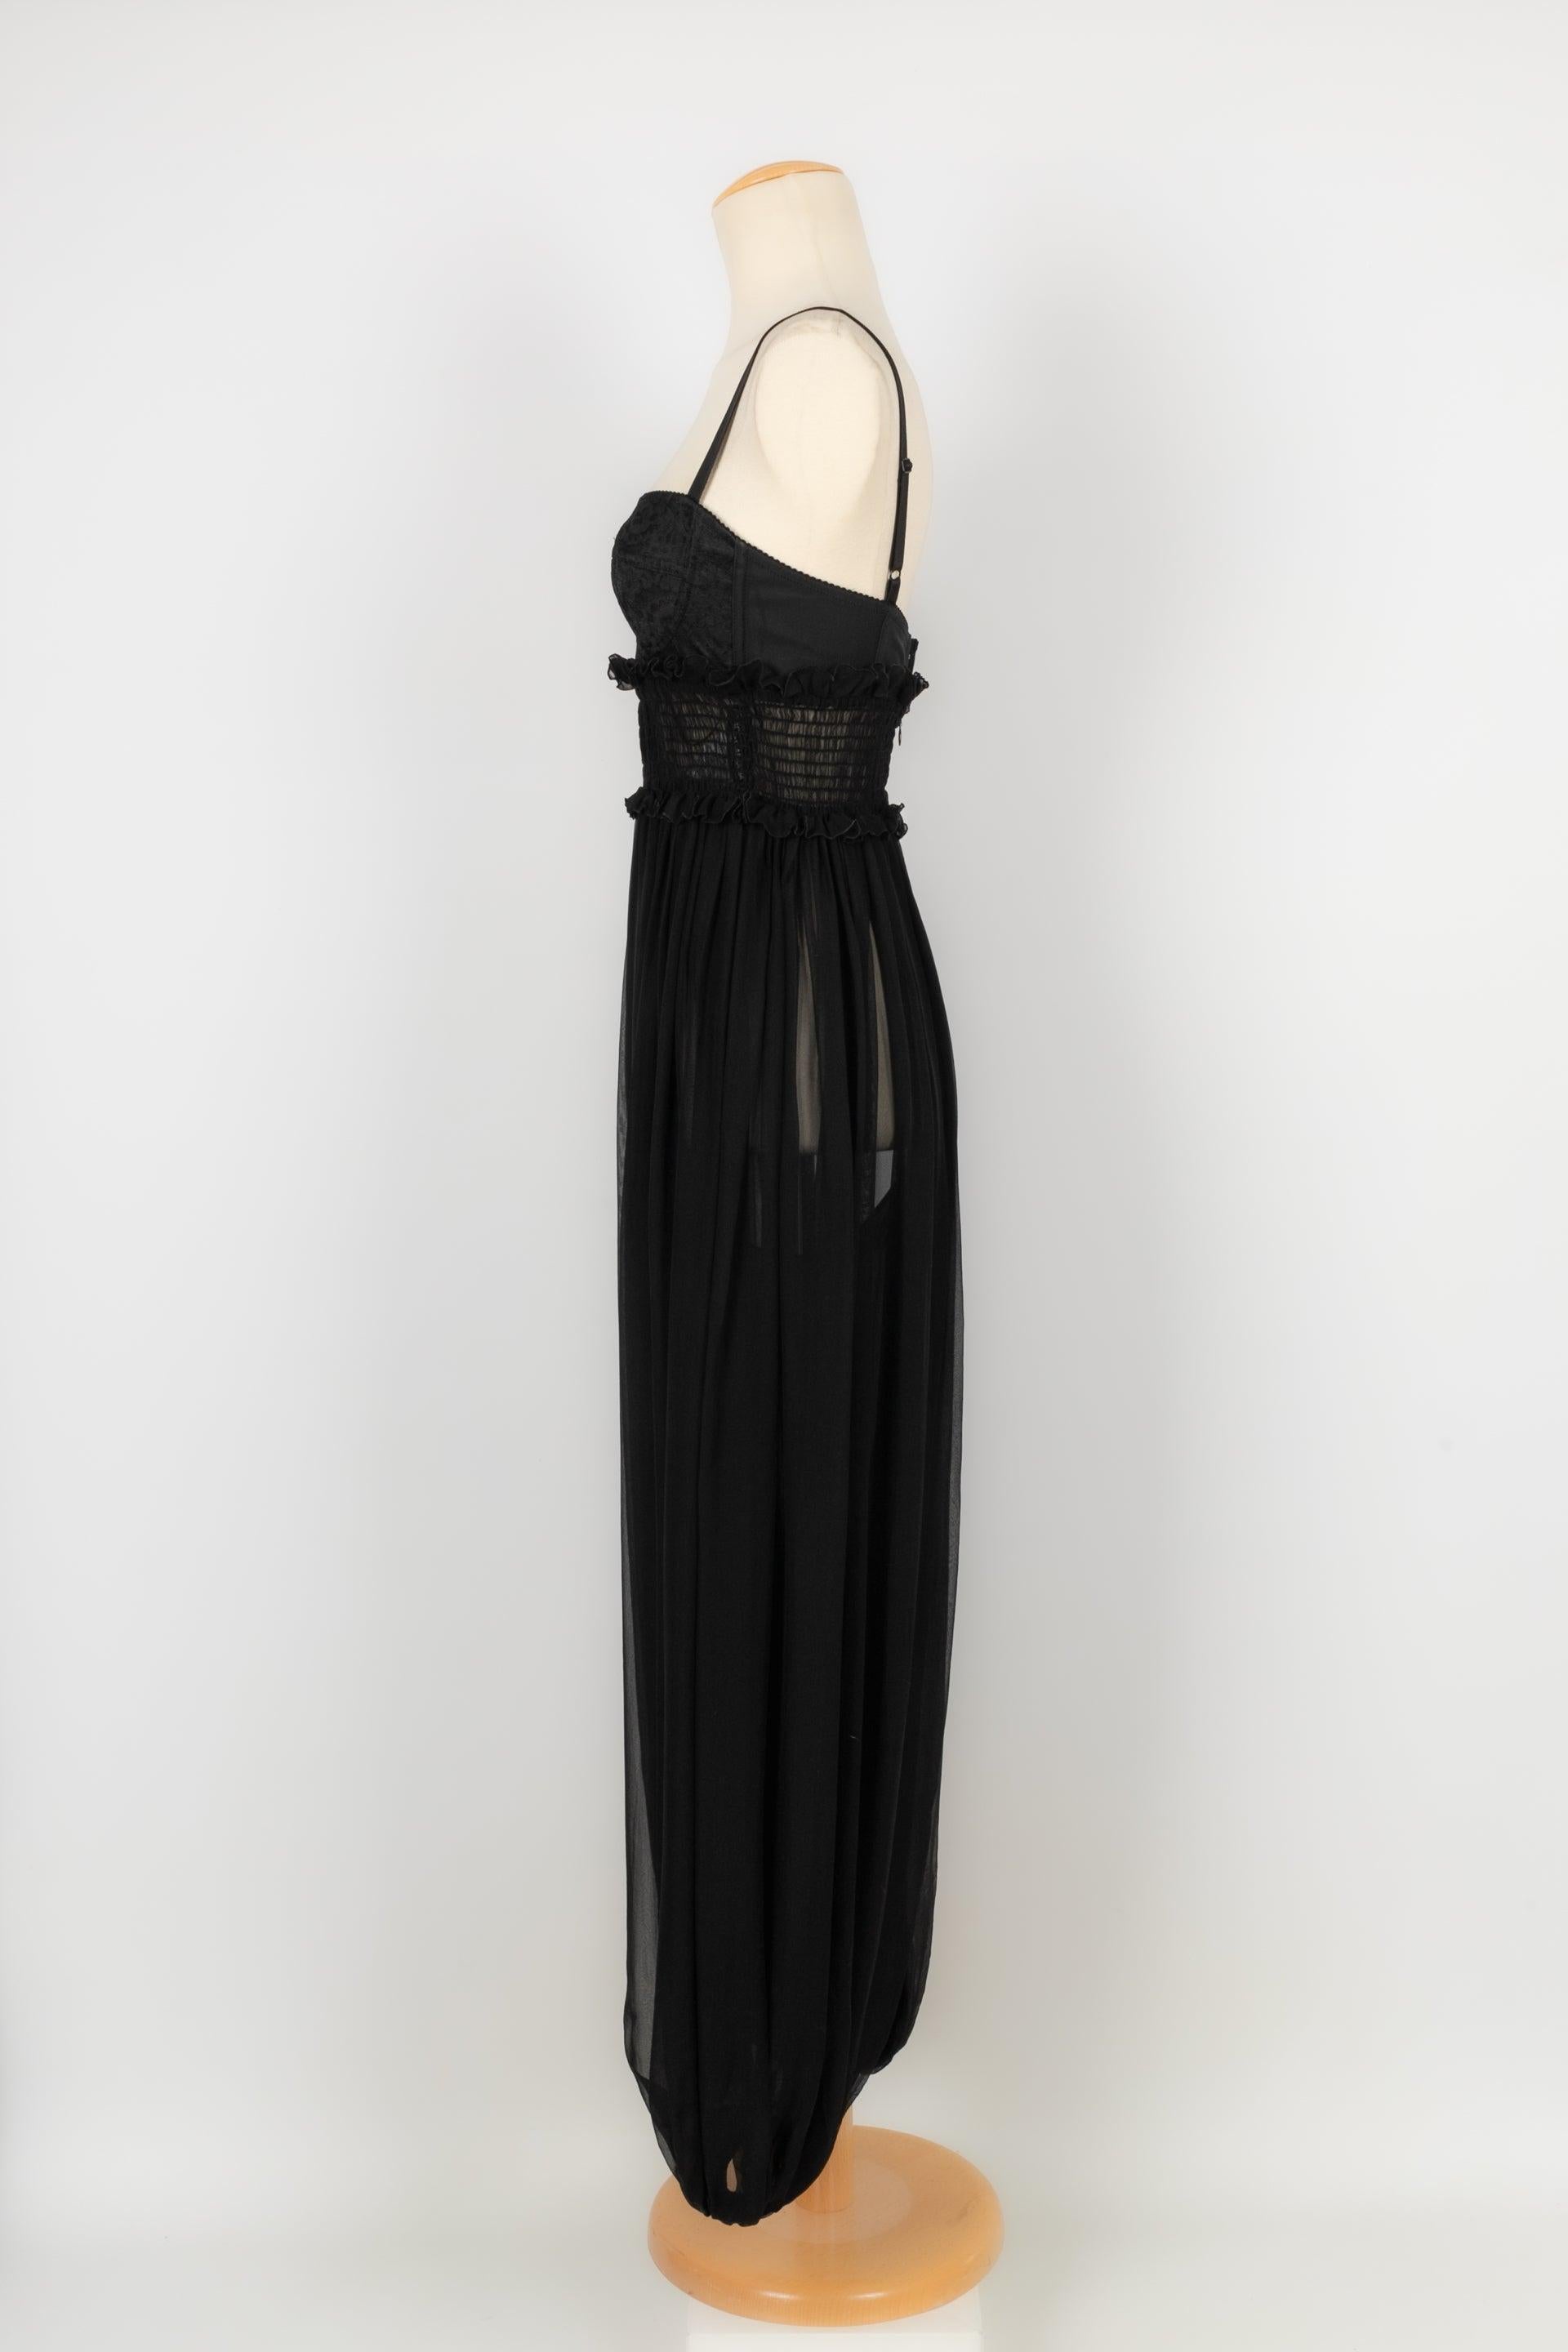 Dolce & Gabbana - (Made in Italy) Black silk muslin dress-style jumpsuit. Size 38IT.

Additional information:
Condition: Very good condition
Dimensions: Chest: 36 cm 
Waist: 32 cm 
Length: 140 cm

Seller reference: VR274
